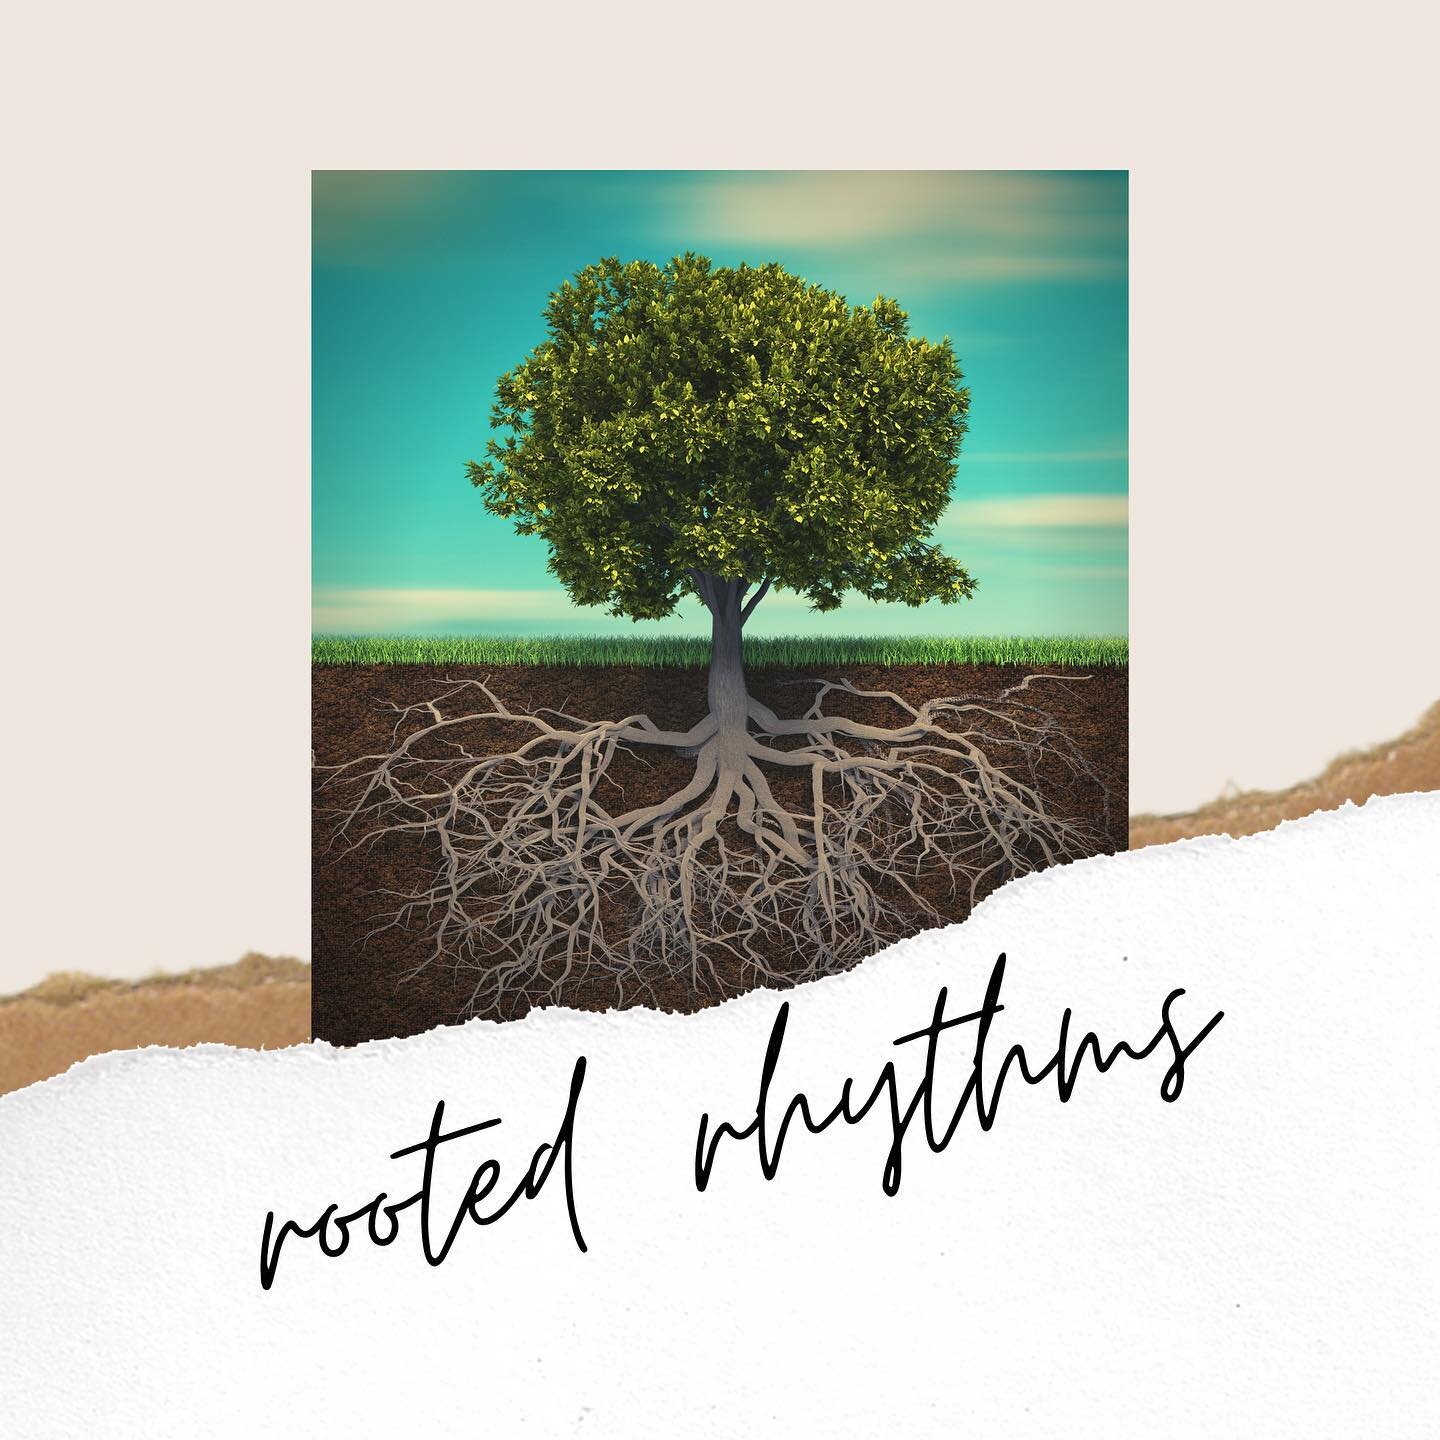 You can catch up on our conversations around Rootedness at our YouTube channel or at our website.

This week in our Rooted journey, we thought a little about where our roots are headed.  Of taking some time this week to think about where our nourishm